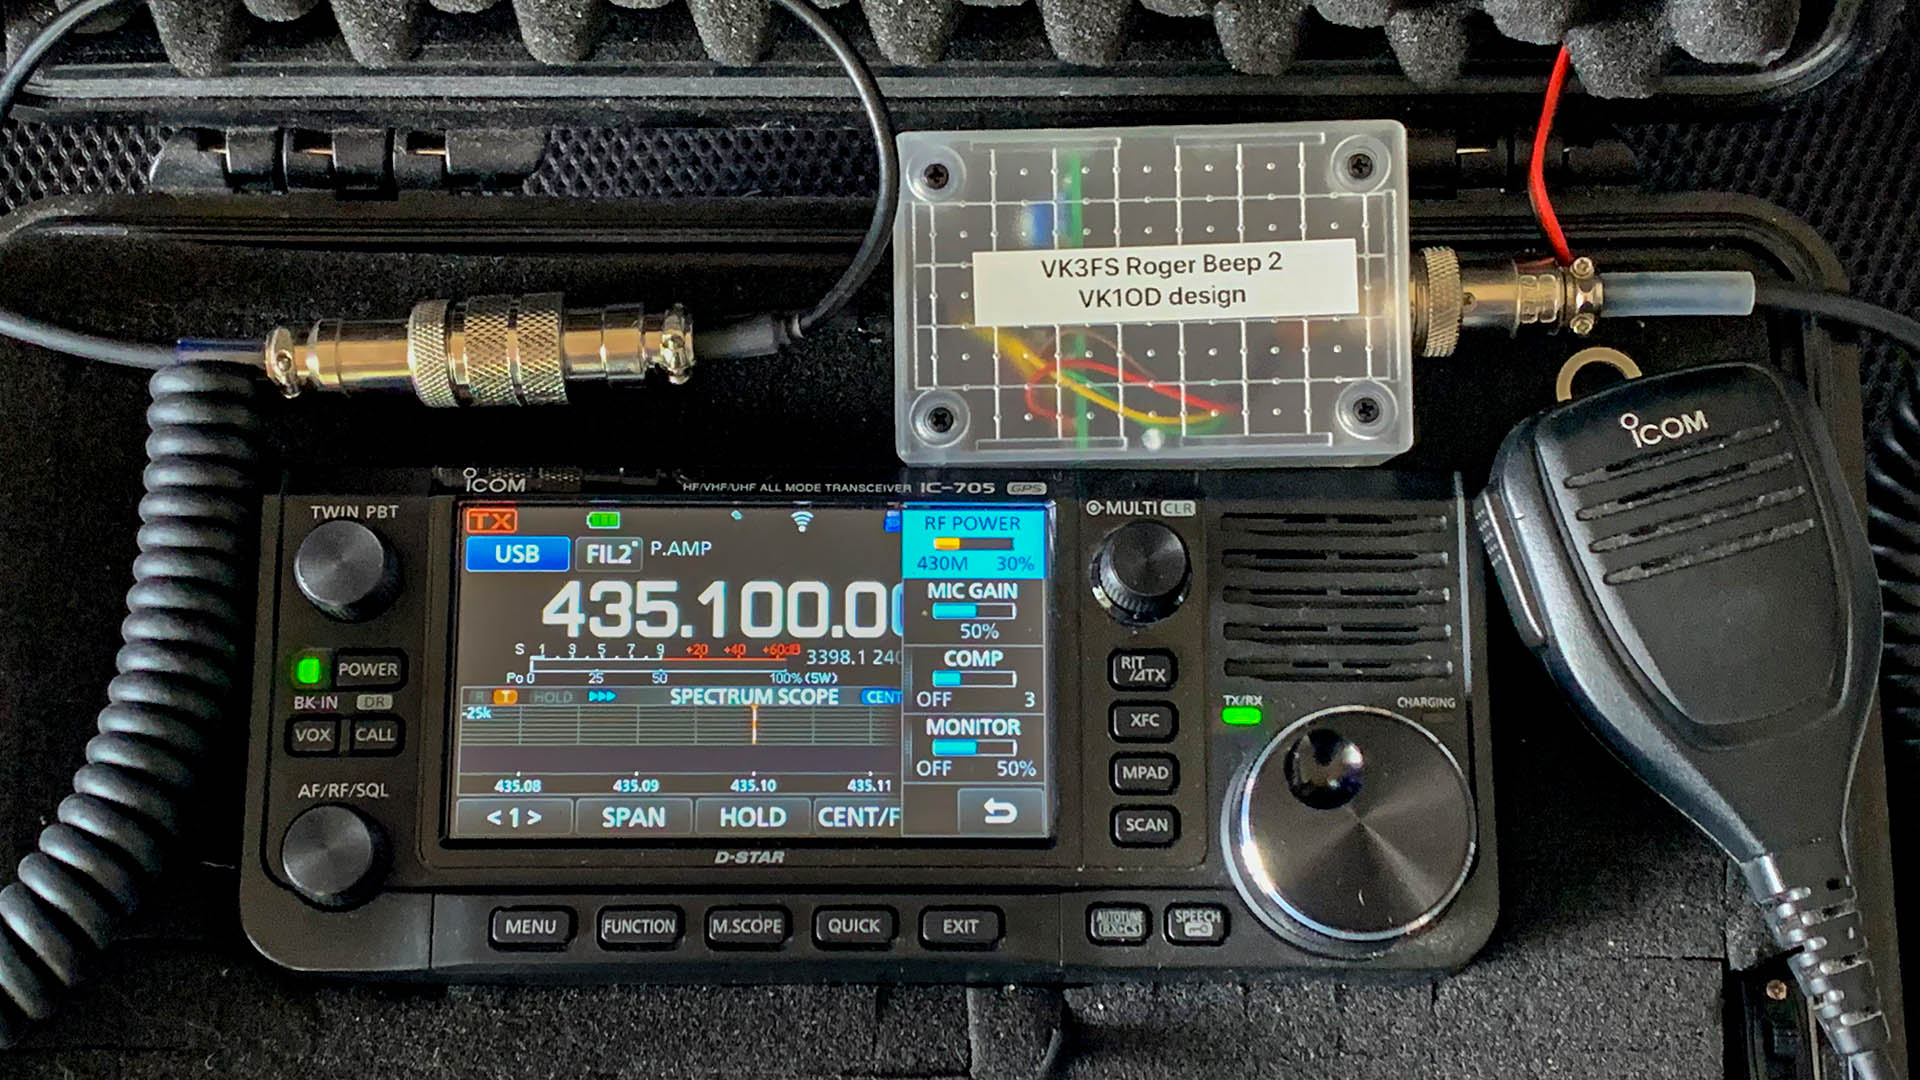 Pictour of the IC-705 with an 8 pin mic adapter